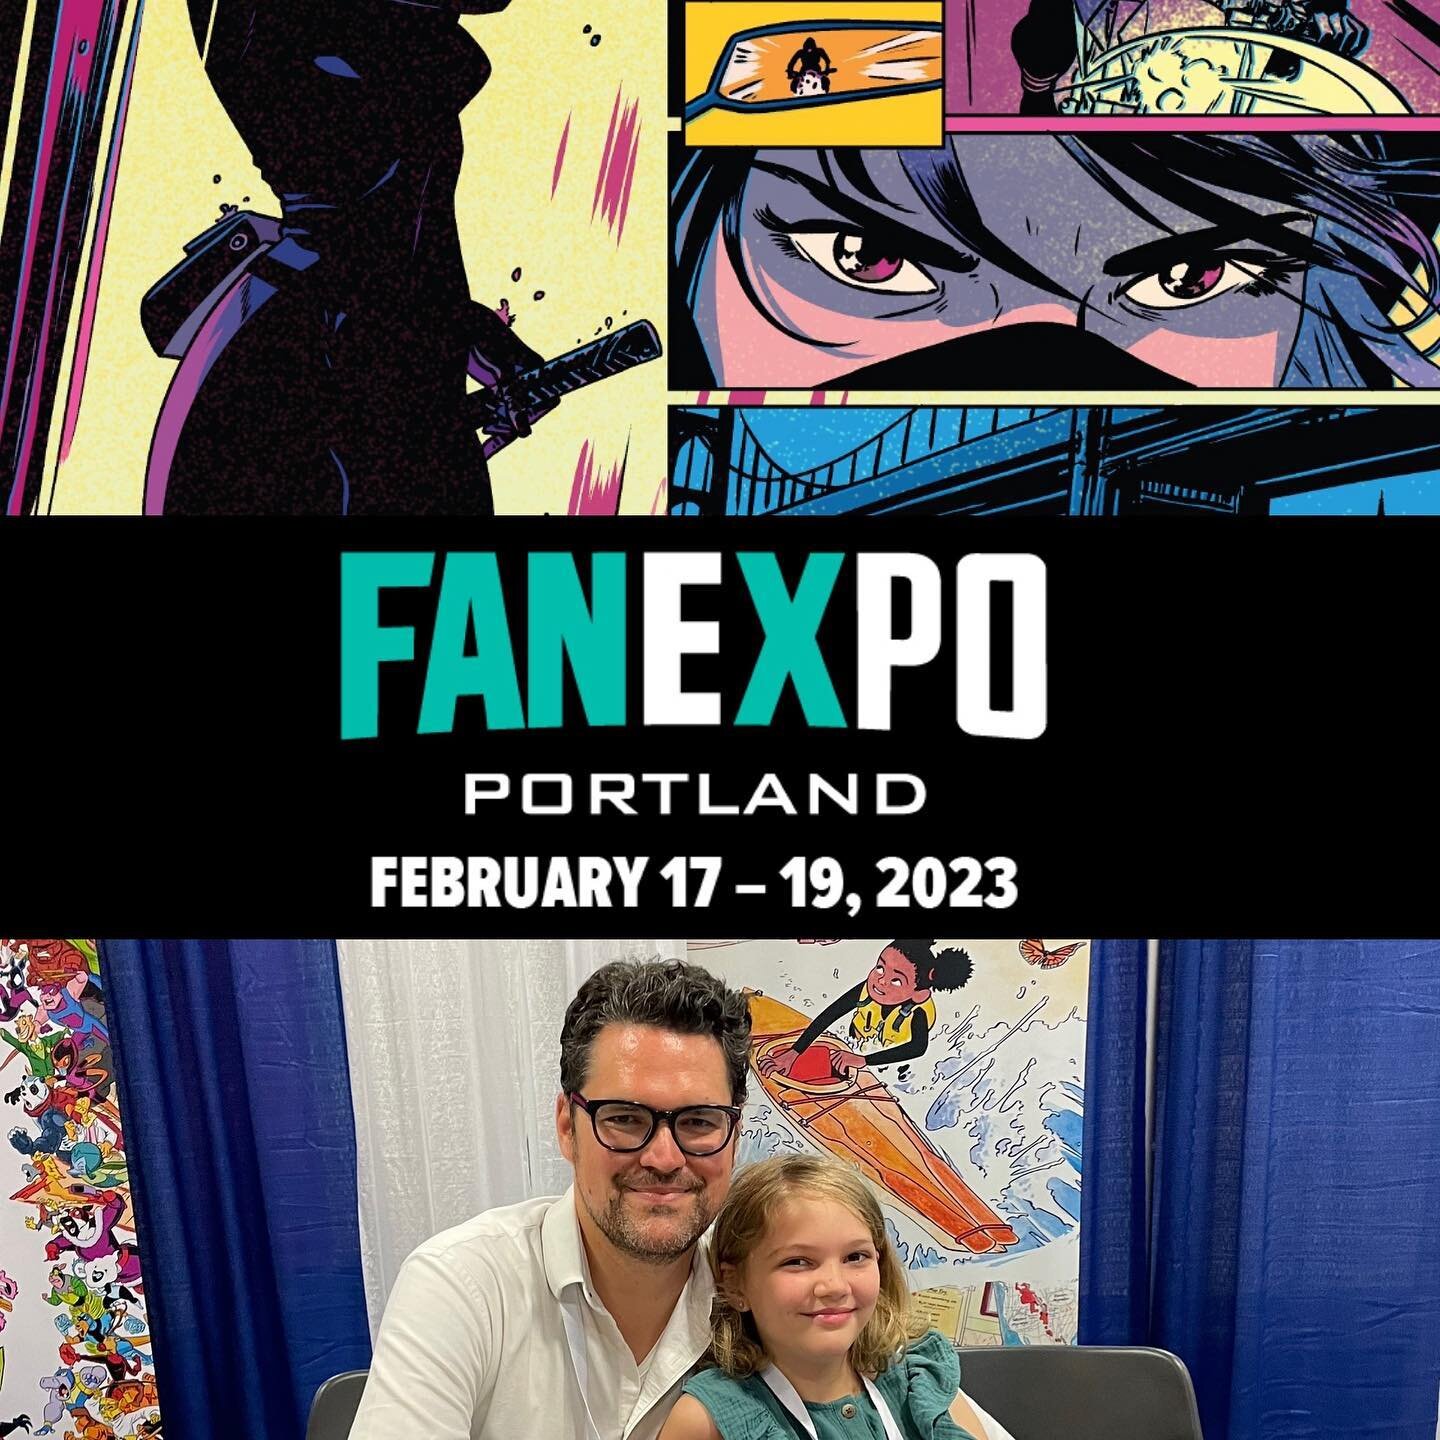 This weekend I&rsquo;m at #FANEXPOPORTLAND2023, Friday-Sunday, table P21. I&rsquo;ll have Little Monarchs books and adventure satchels, and some commission slots &mdash; get &lsquo;em while you can! @holidayhousebks